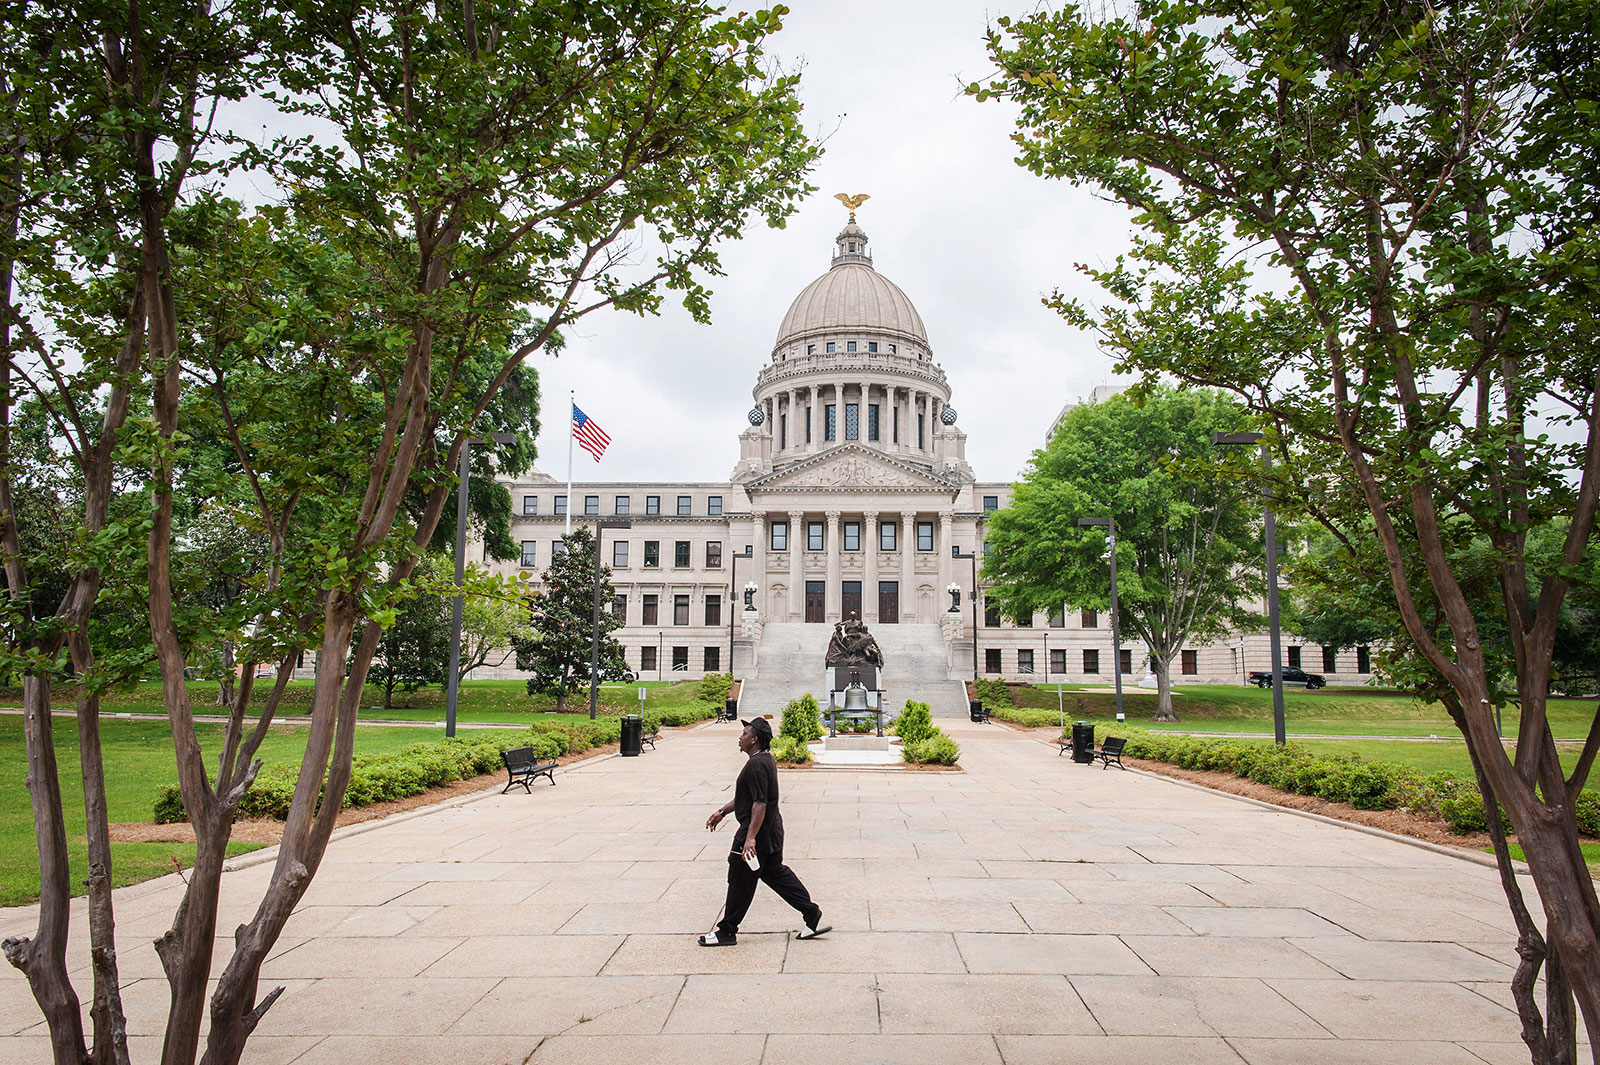 A person walks by the Mississippi State Capitol building in Jackson on Wednesday, April 8.